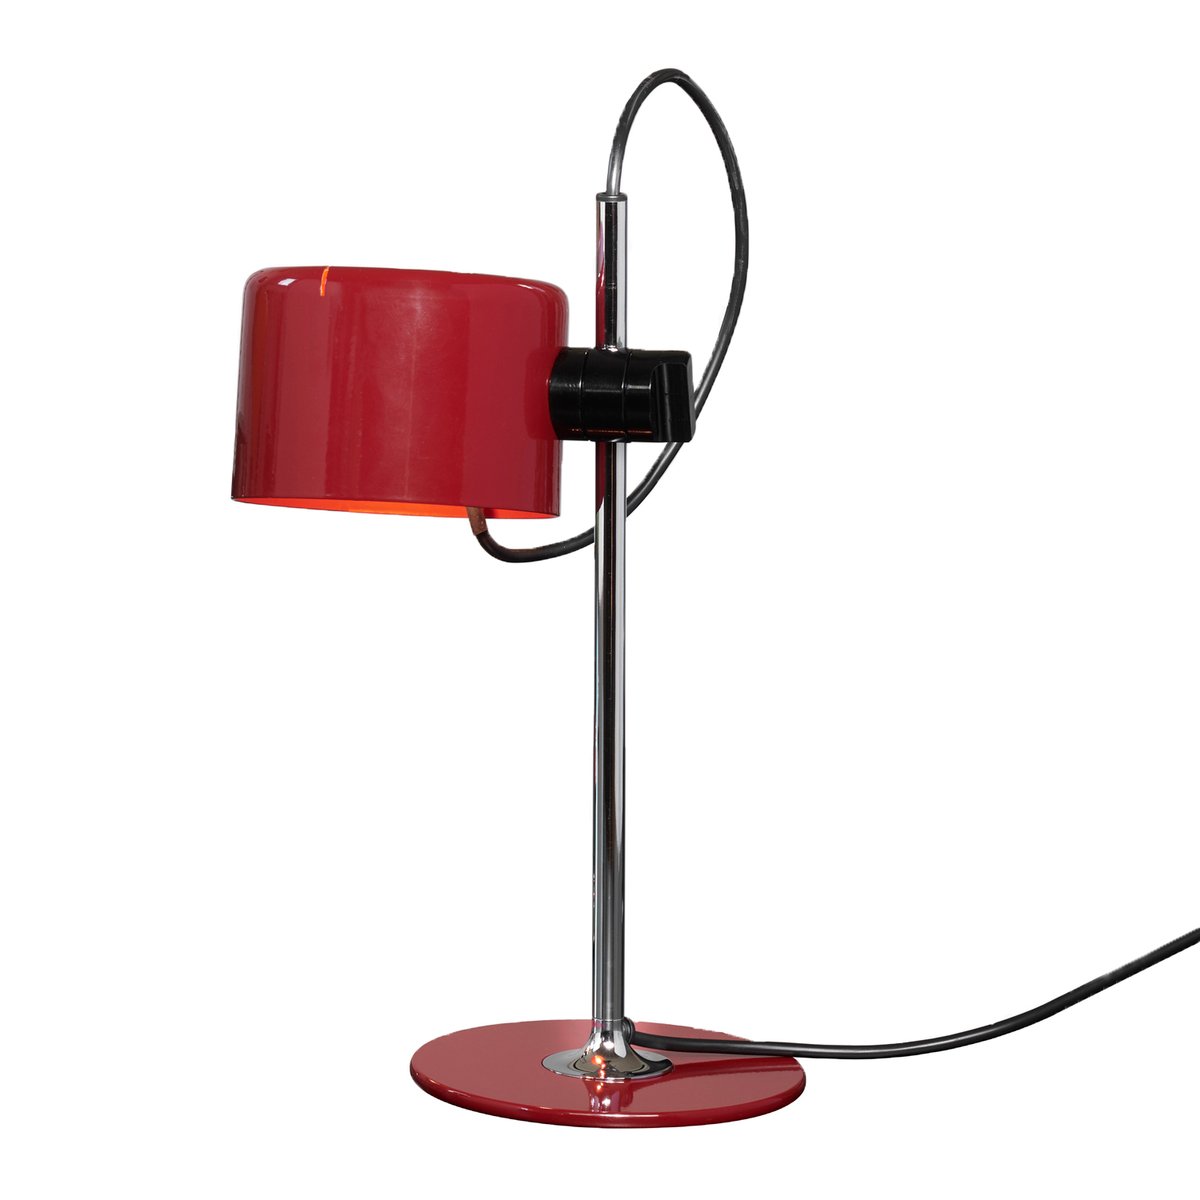 Oluce Mini Coupé 2201 Table Lamp Red, Small Red Table Lamp